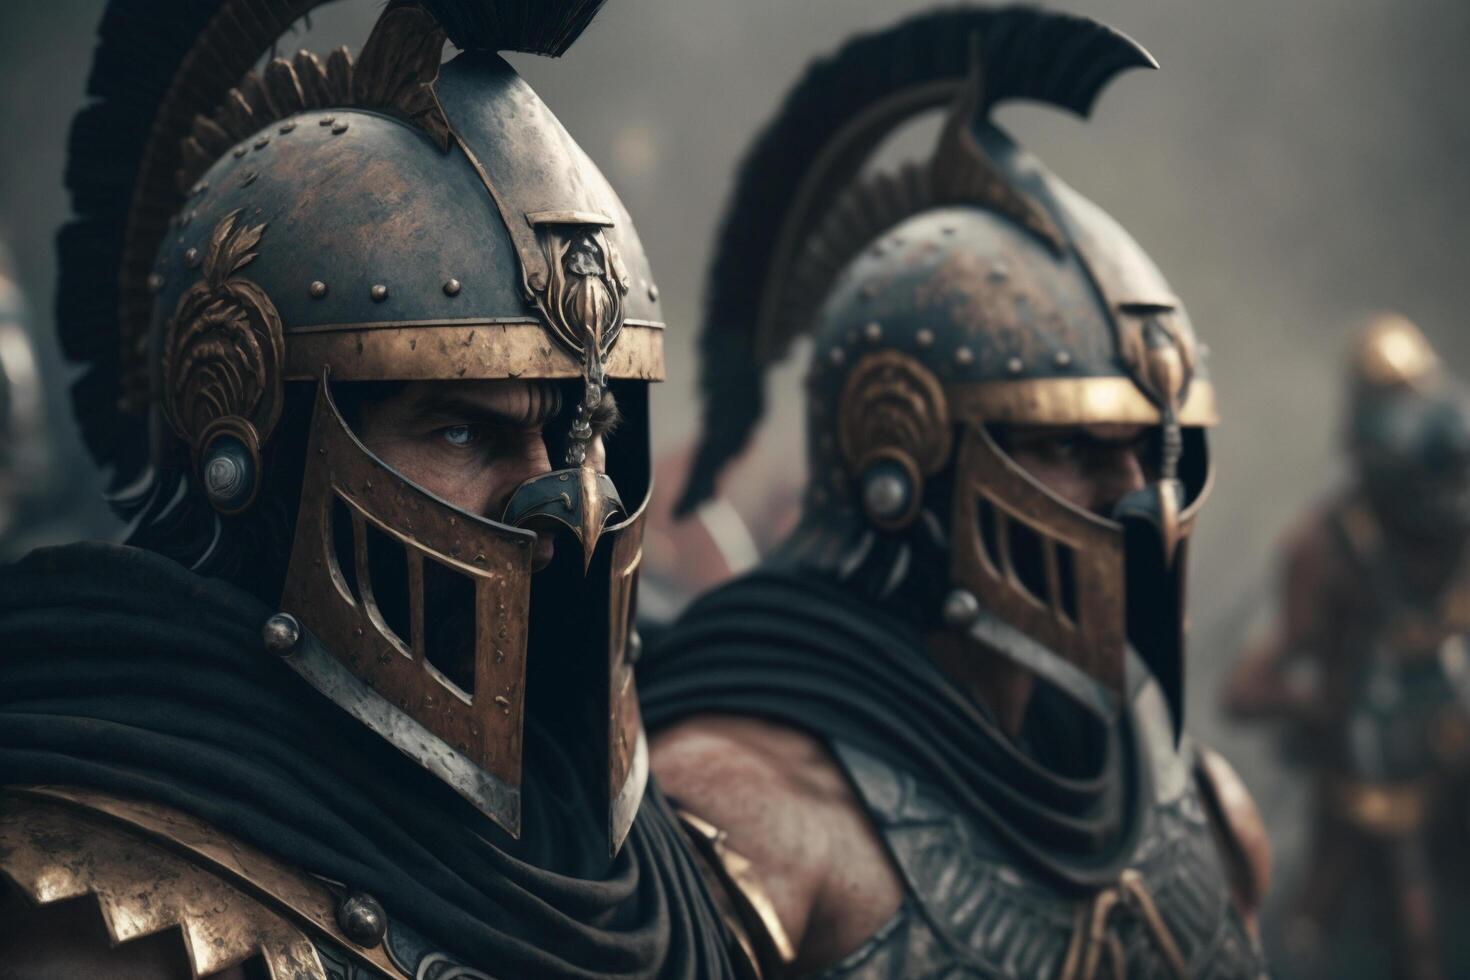 A close up of two men in armor, photo